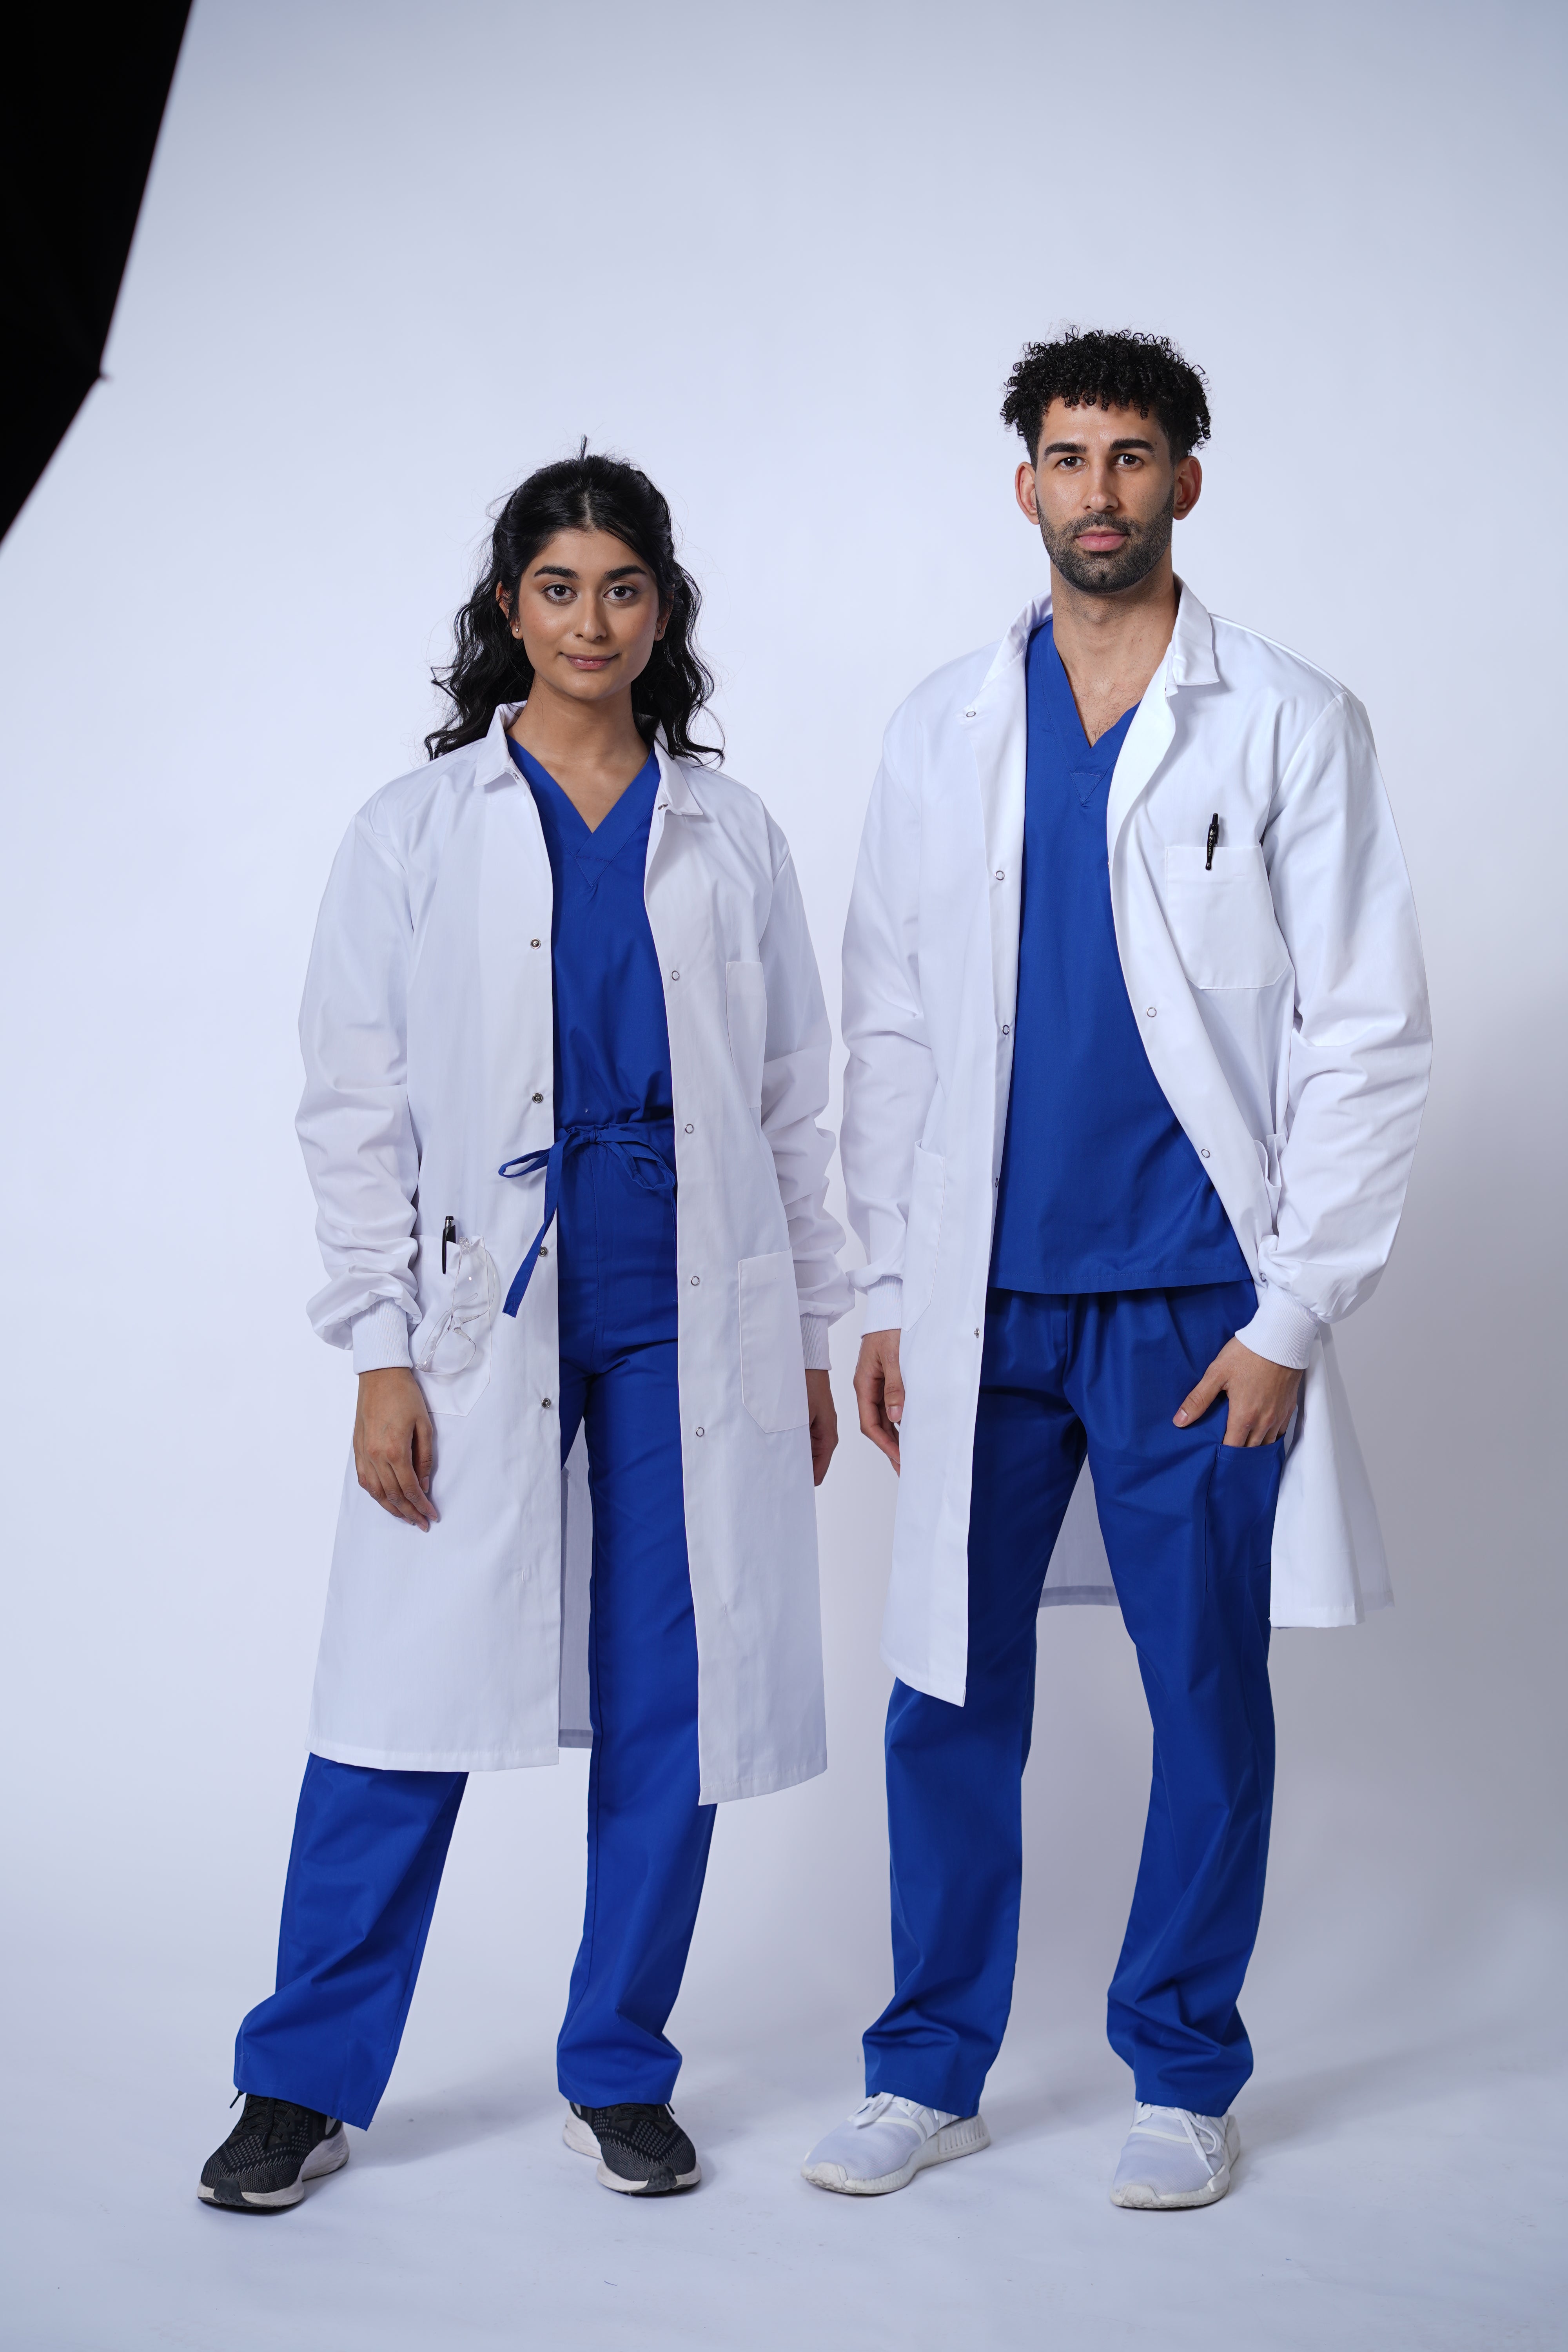 Unisex Lab Coats with Snaps / Buttons